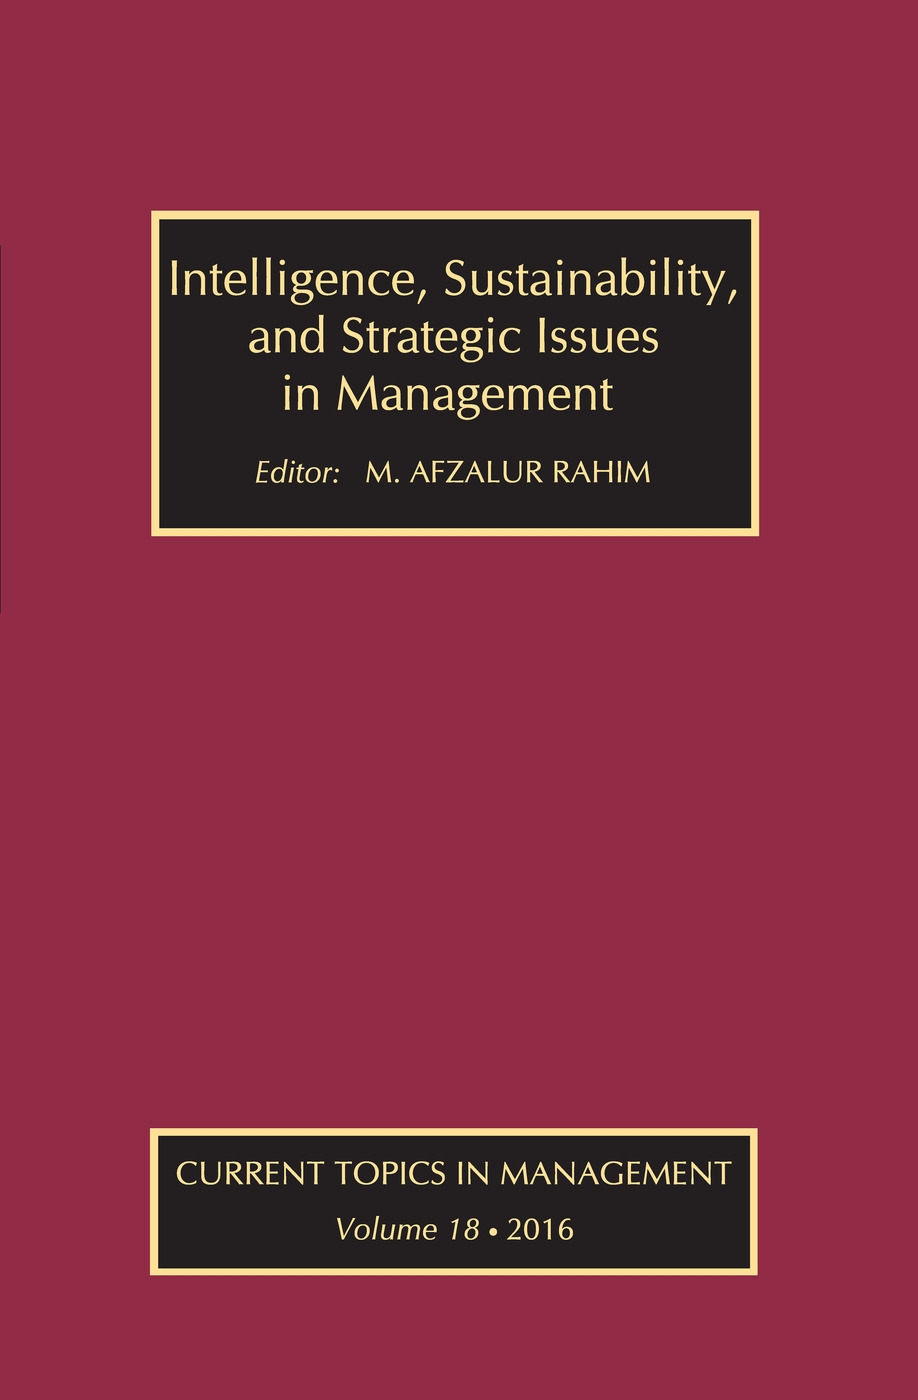 Intelligence, Sustainability, and Strategic Issues in Management: Current Topics in Management